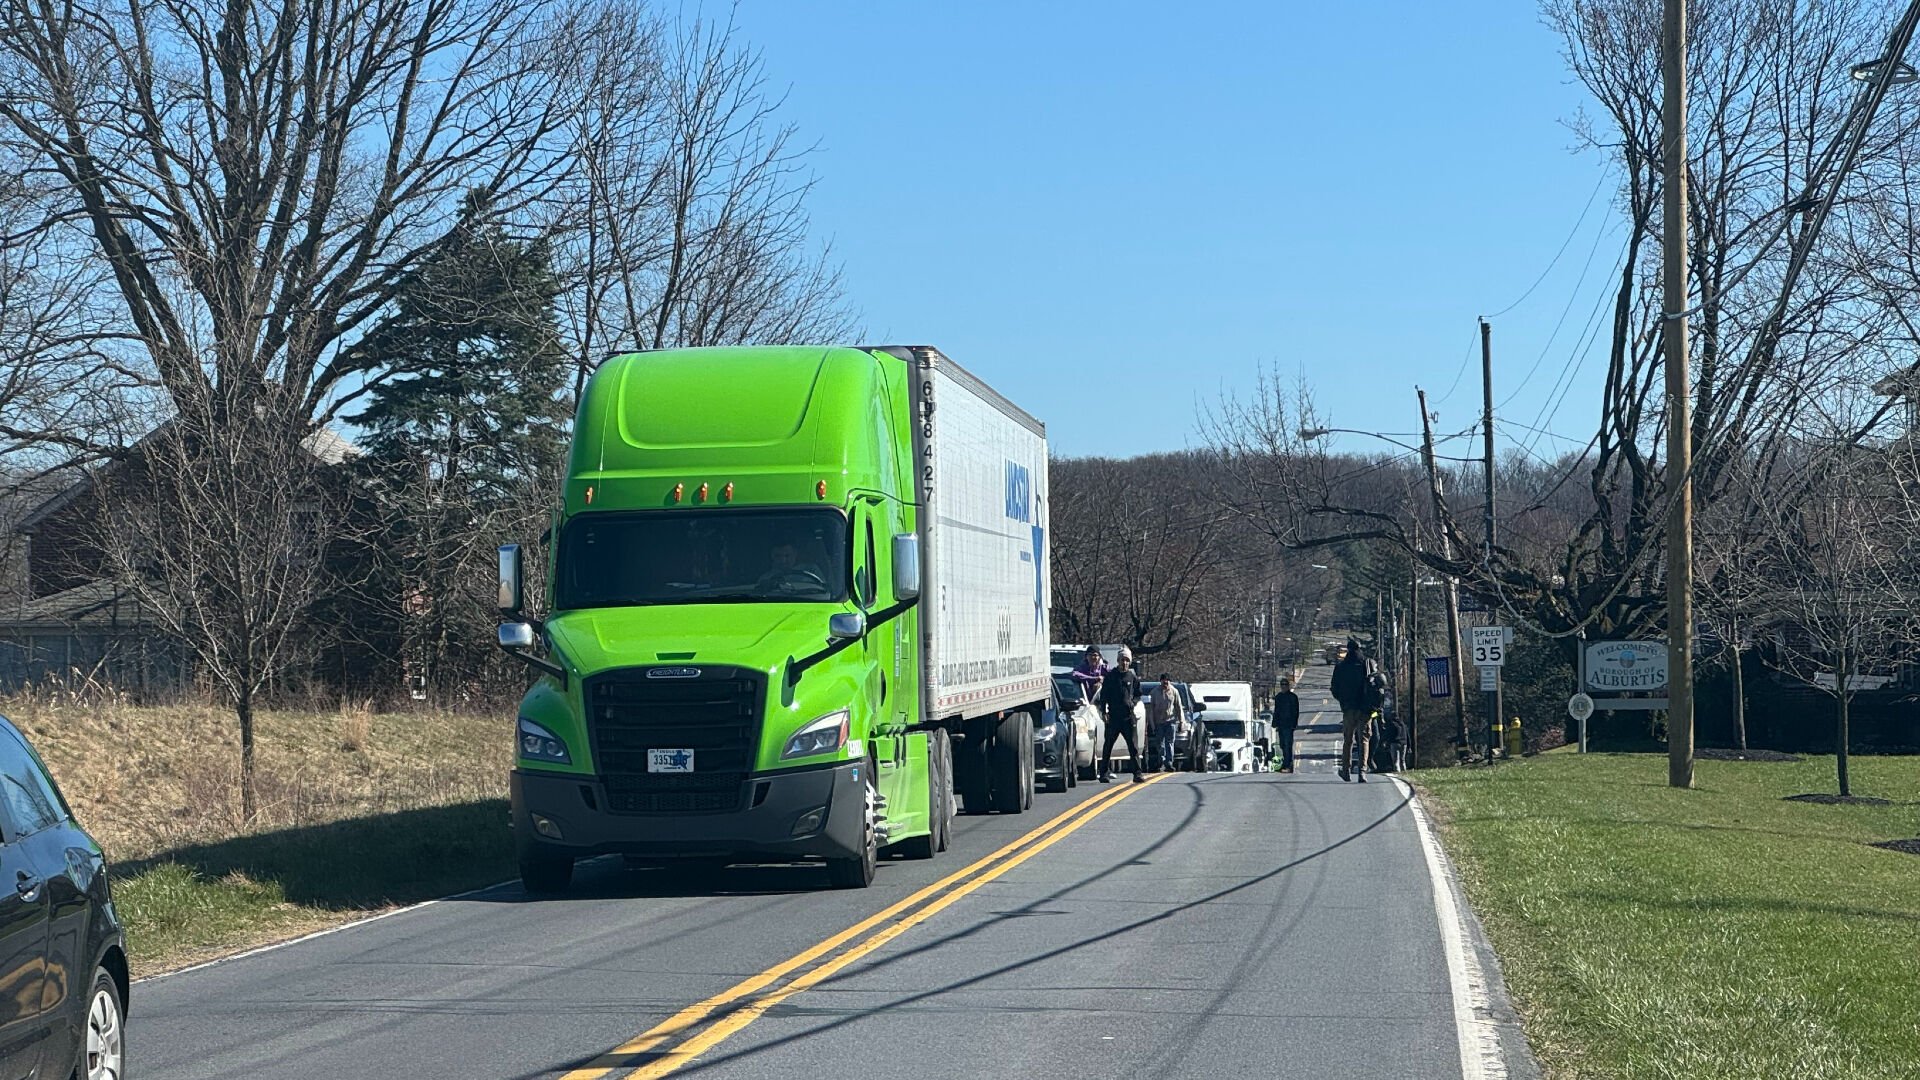 Suspicious Package Prompts Business Evacuation and Road Closures in Lower Macungie; Allentown Bomb Squad Provides Assistance | Lehigh Valley Regional News